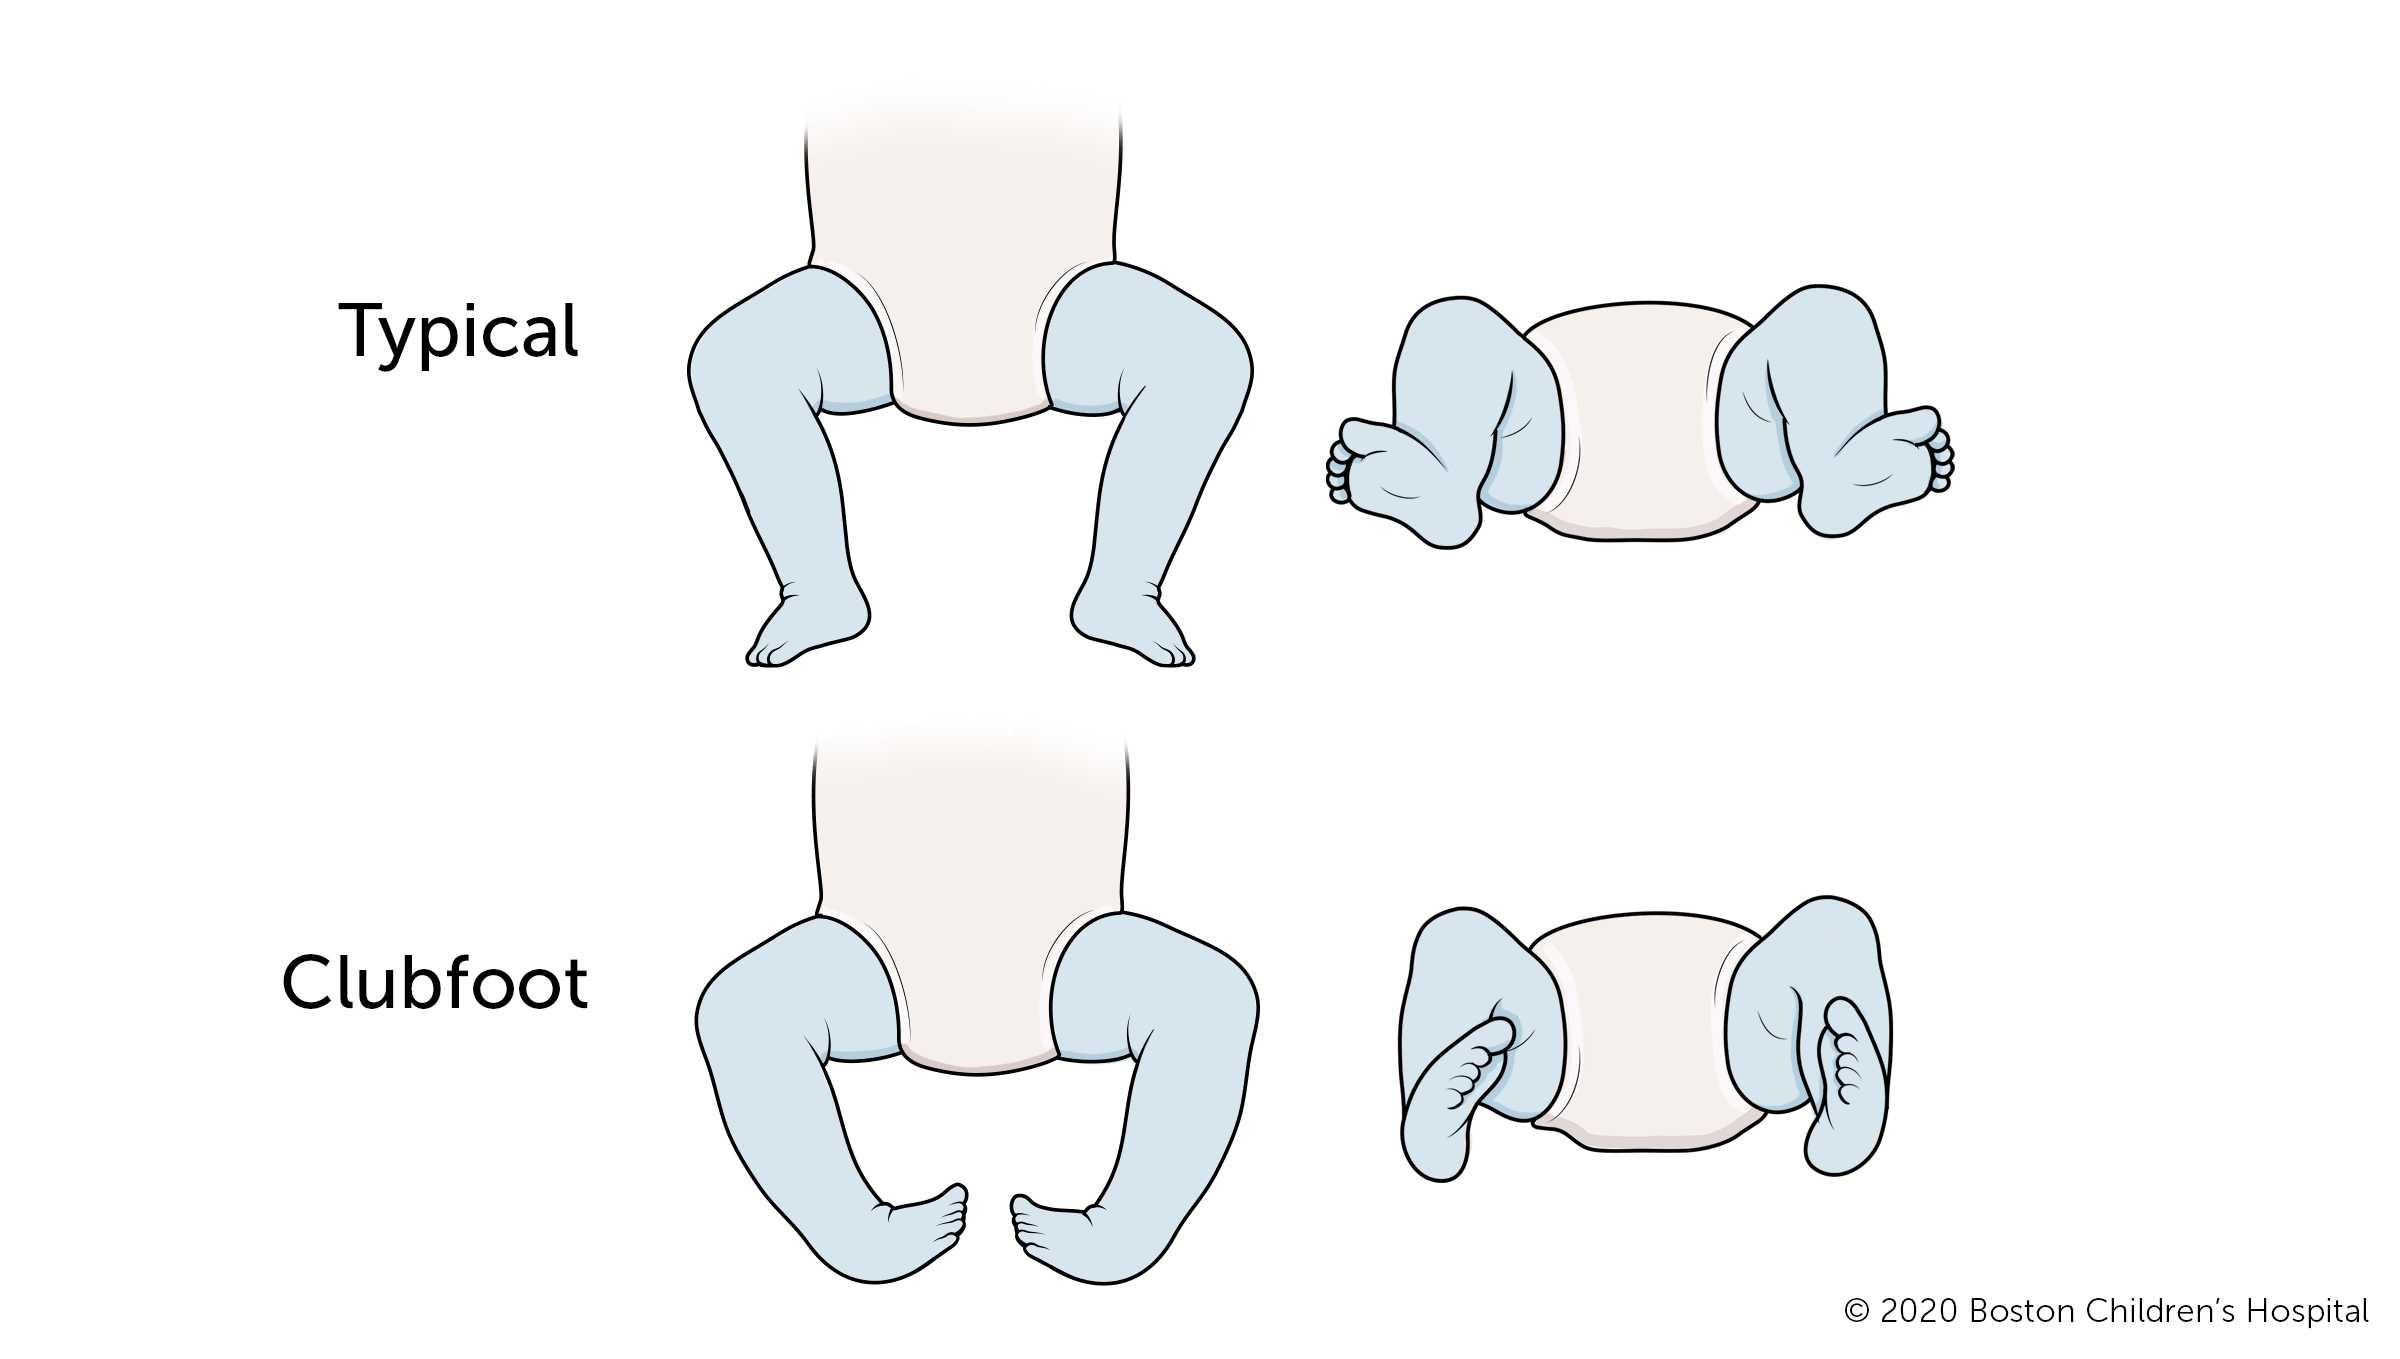 With clubfoot, the front half an affected foot turns inward and the heel points down.